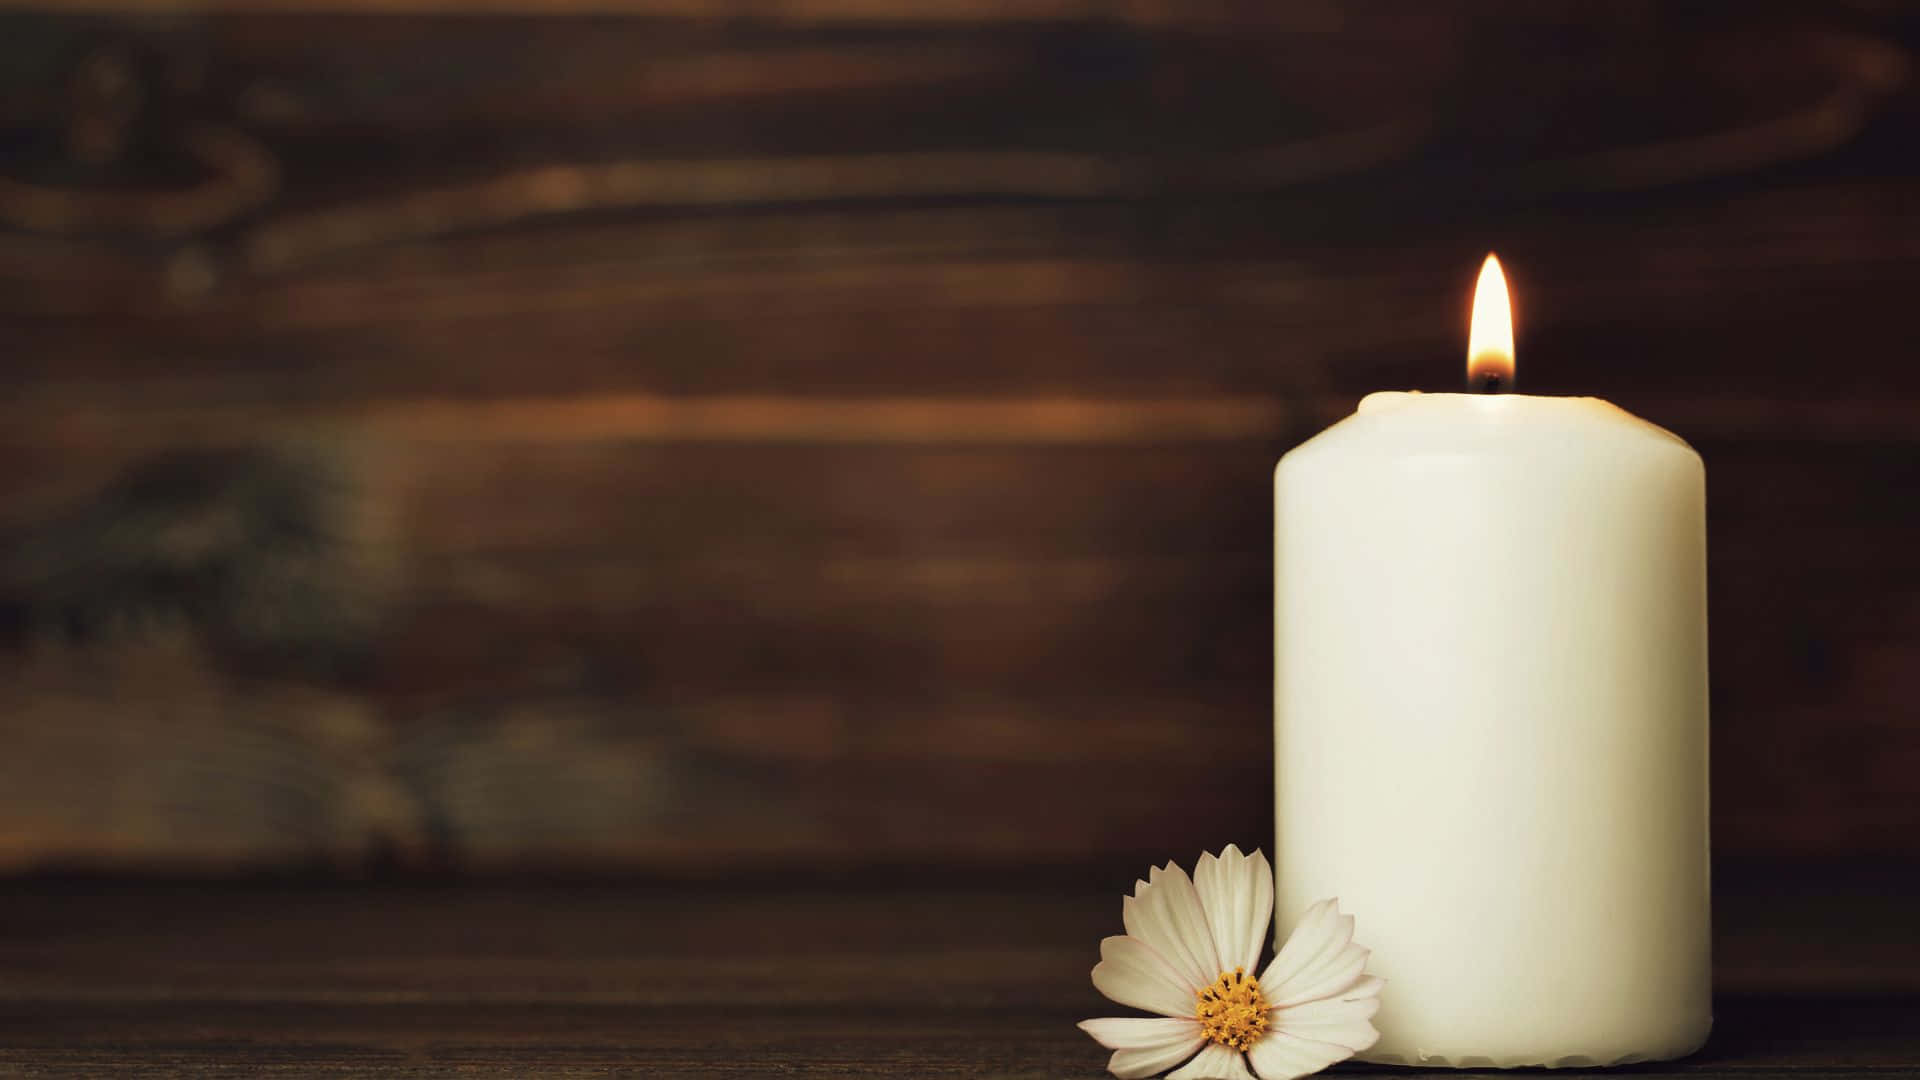 A Candle With A Flower On A Wooden Table